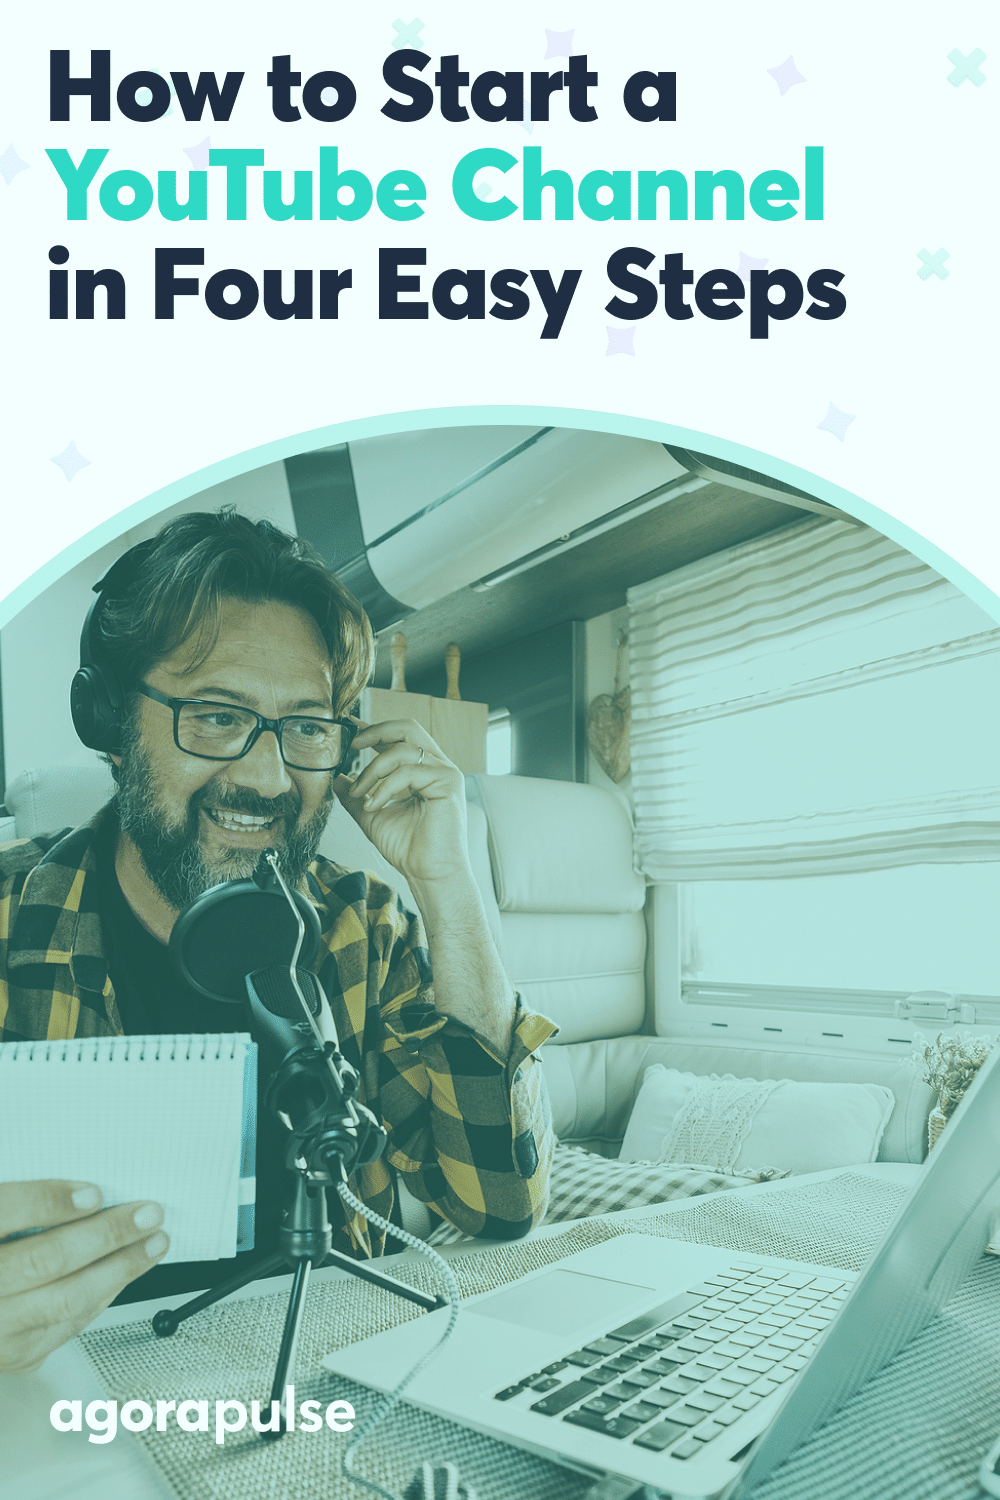 How to Start a YouTube Channel in Four Easy Steps